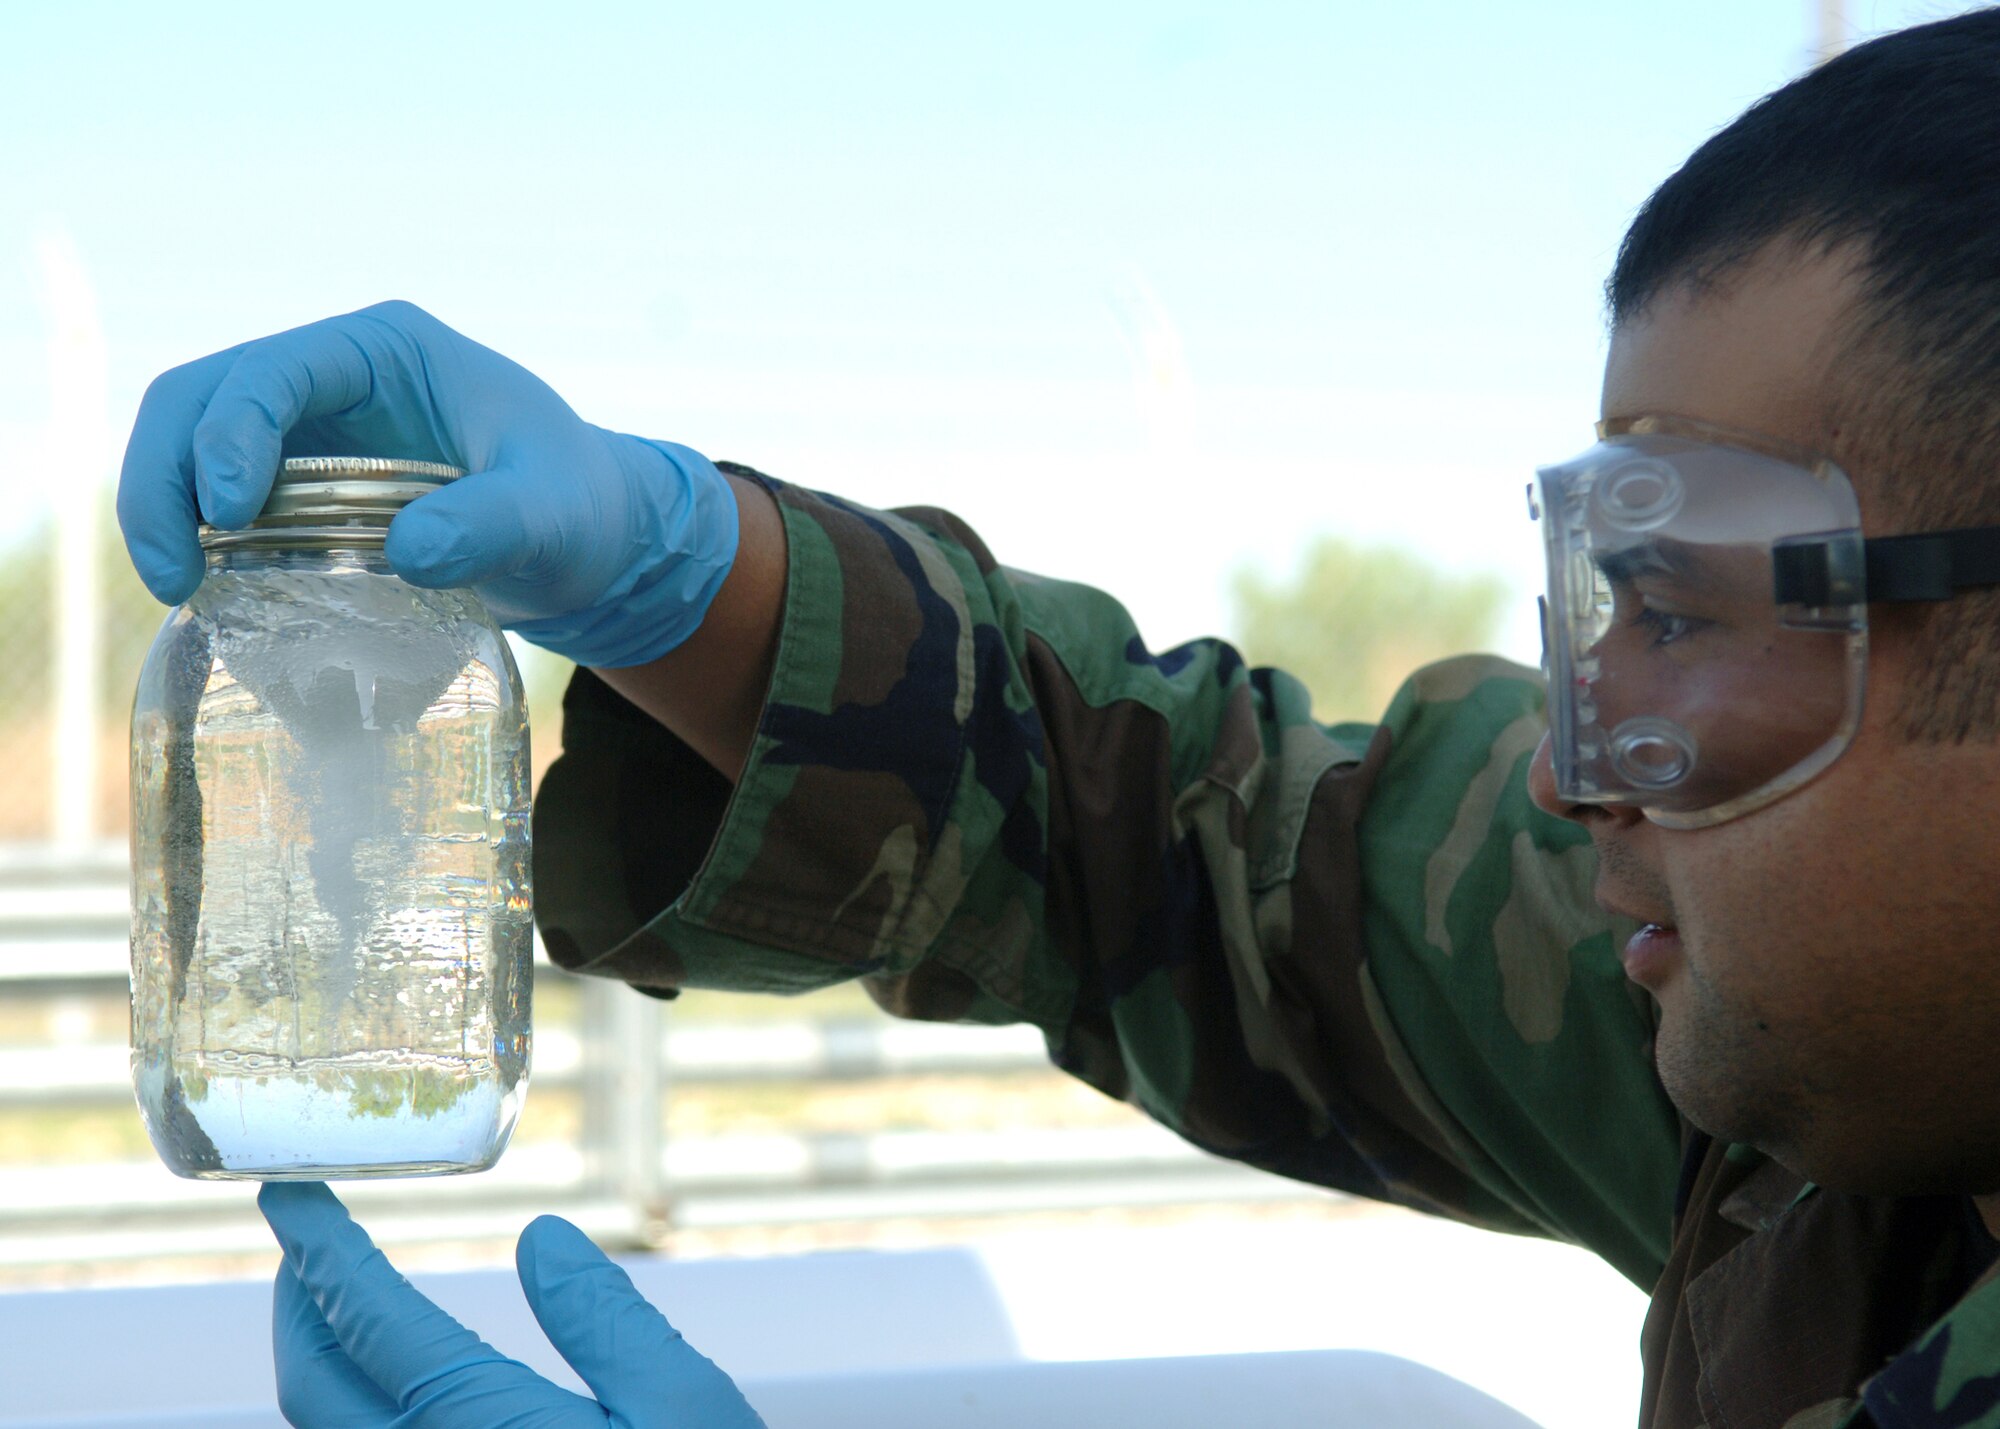 DYESS AIR FORCE BASE, Texas -- Senior Airman Rogelio Guerrero examines a jar of JP-8 fuel April 24. The fuel will later be tested to examine the flash point of the fuel, the amount of water in it, and the amount of impurities. (U.S. Air Force Photo by Airman 1st Class Micheal Breaux)